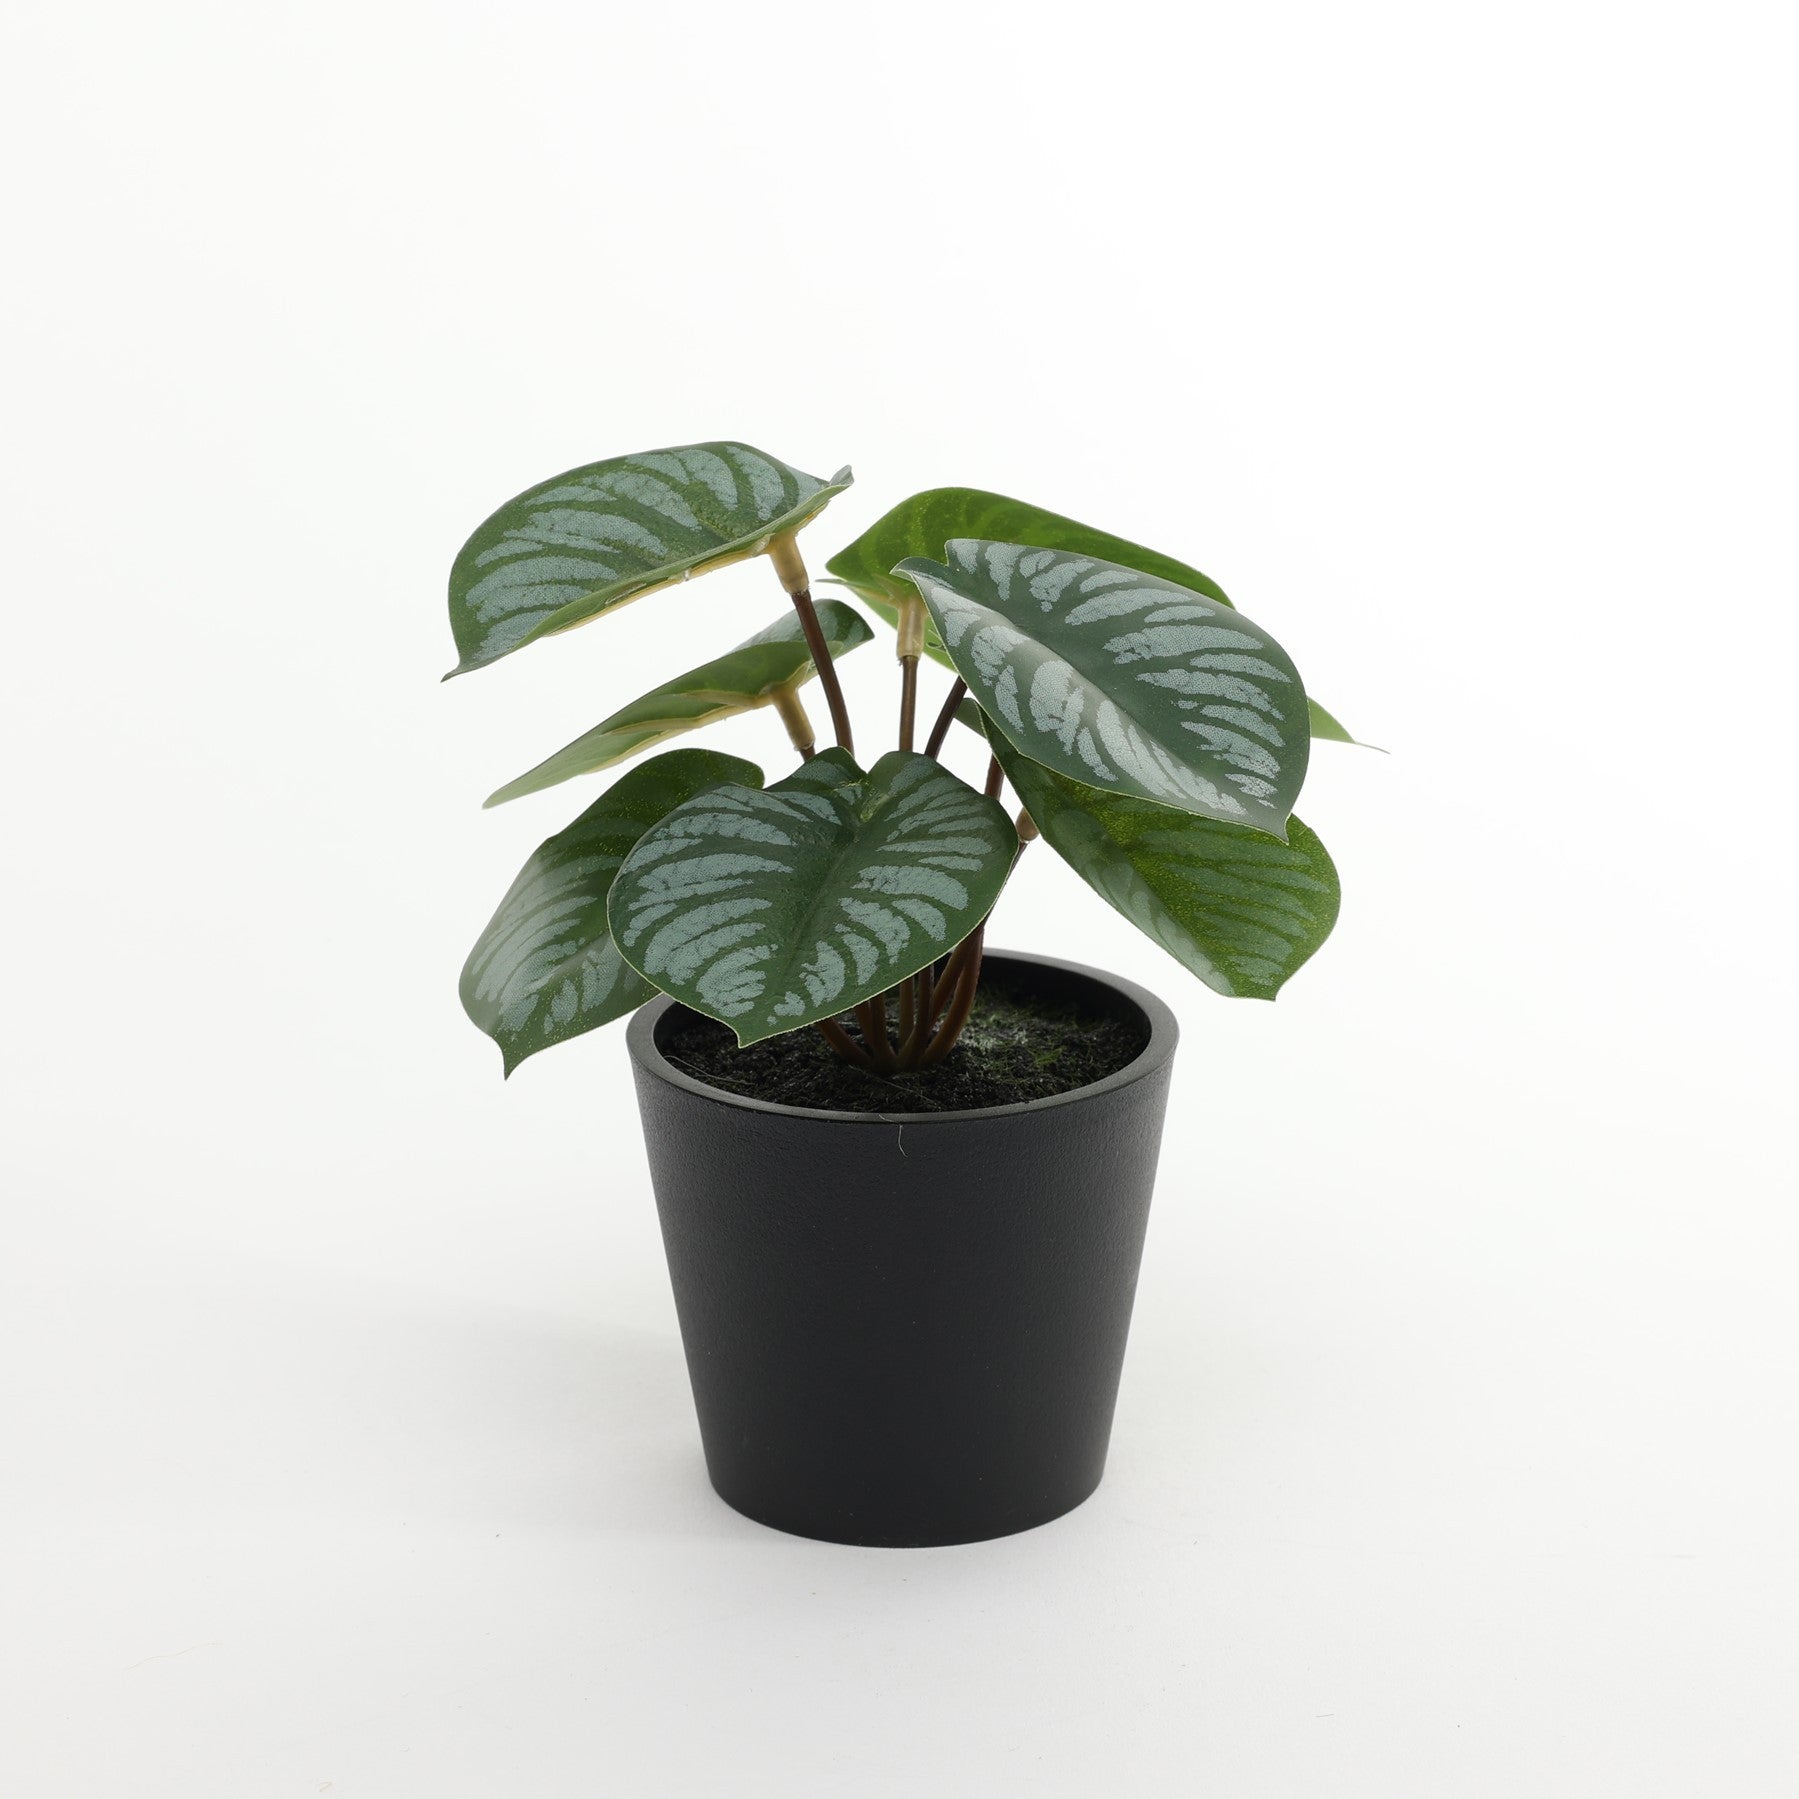 View Calathea Potted House Plant 13cm information